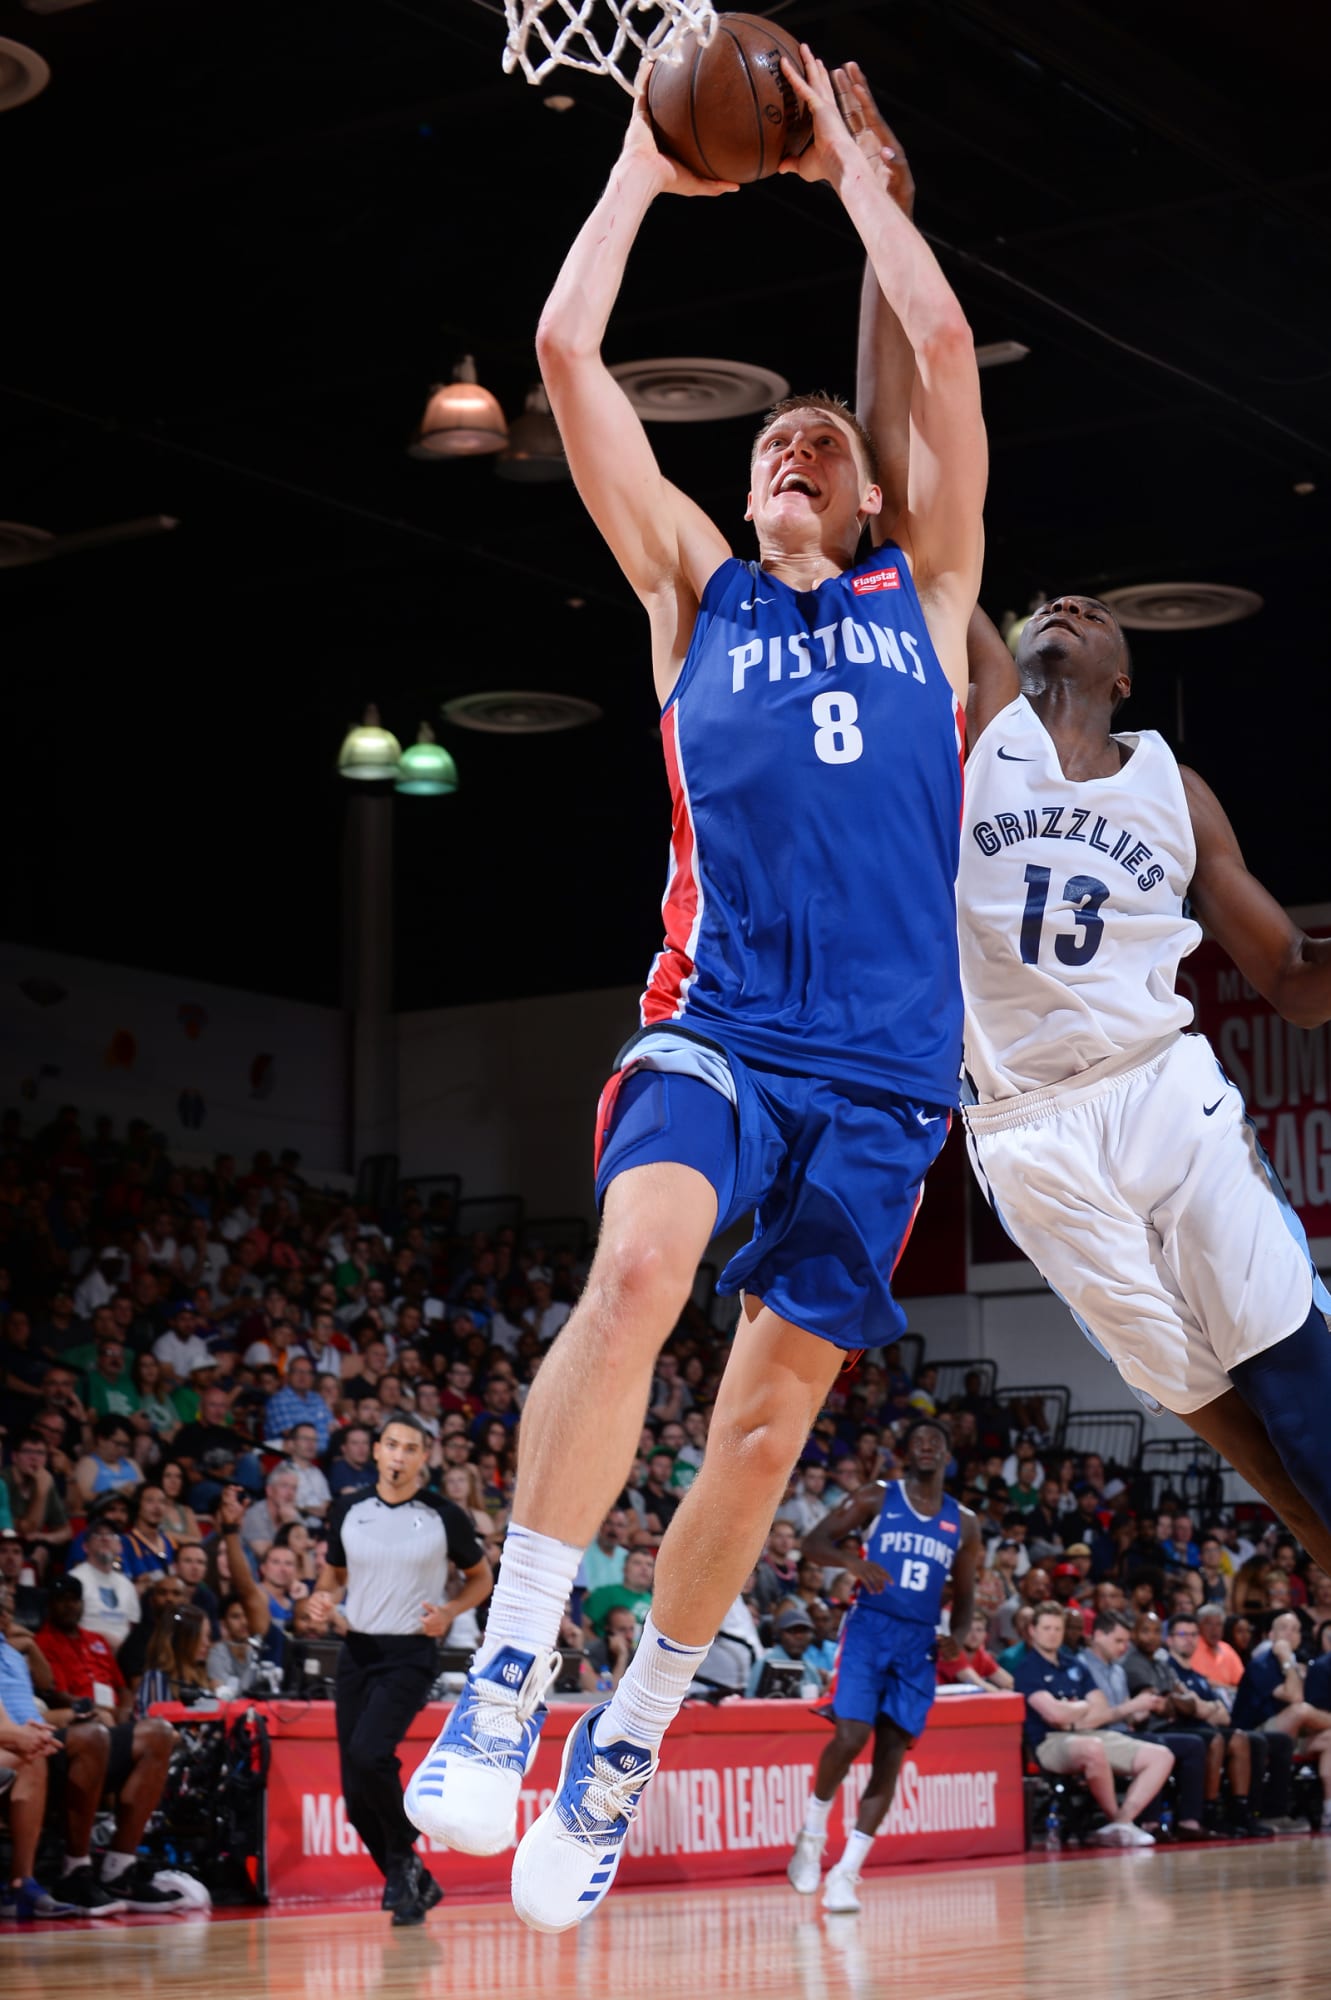 This season will be Henry Ellenson's last chance with the Detroit Pistons